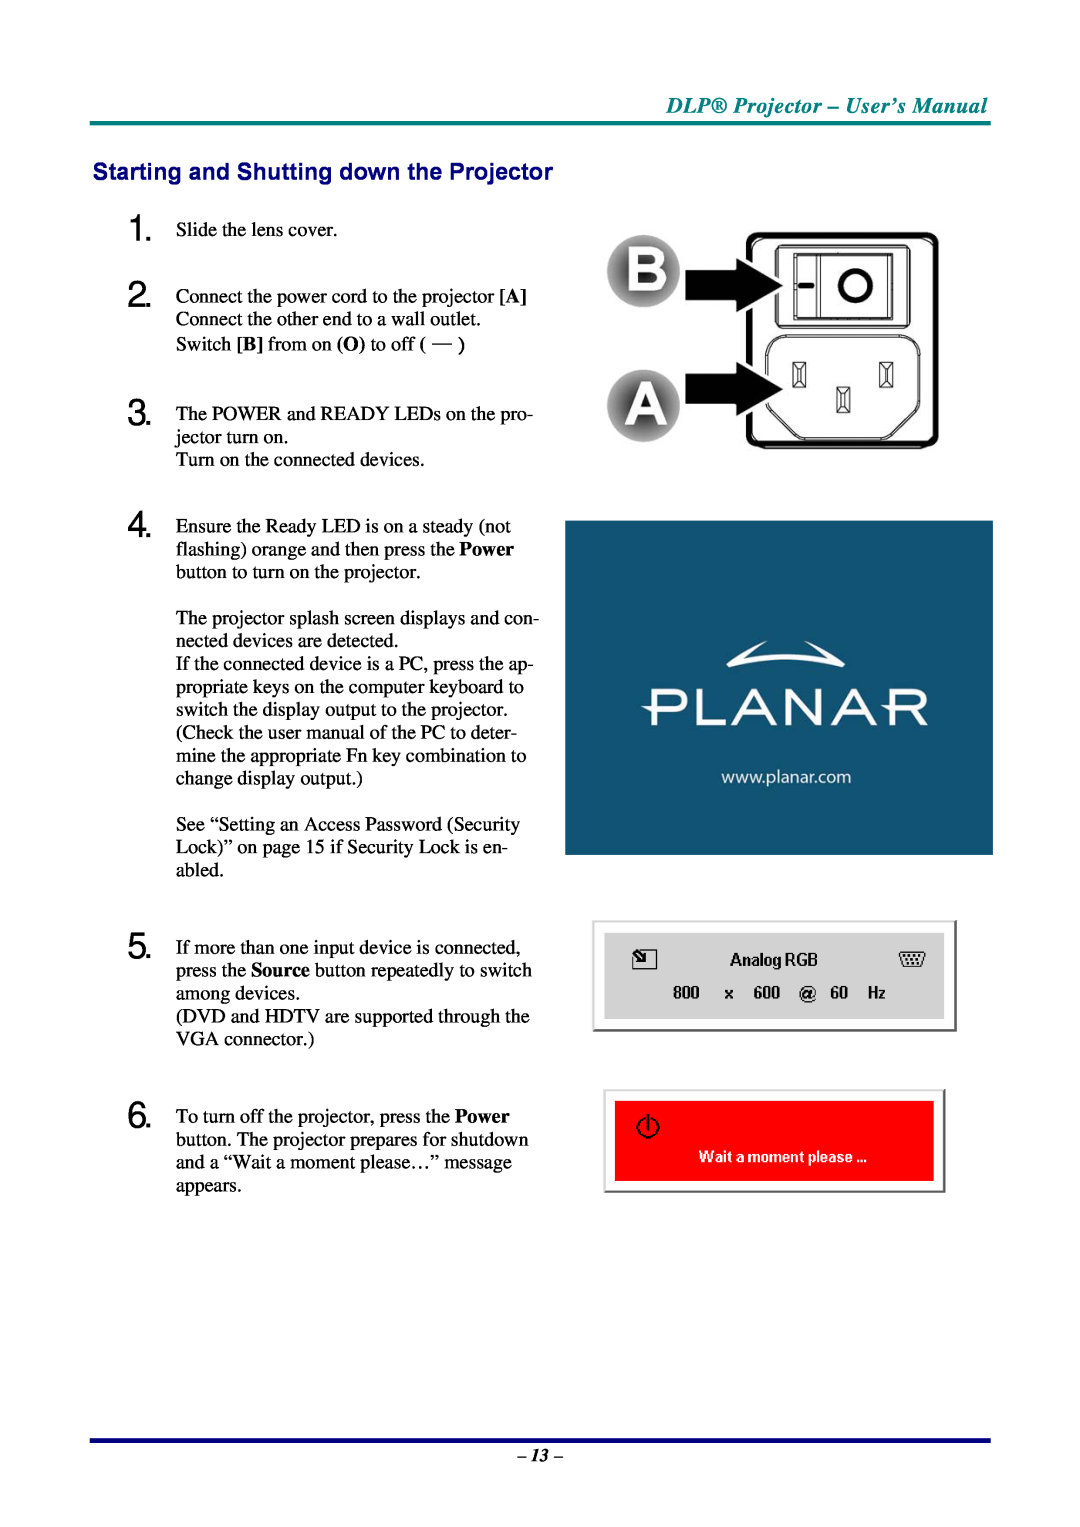 Planar PR5020, PR3020 manual Starting and Shutting down the Projector, DLP Projector - User’s Manual 